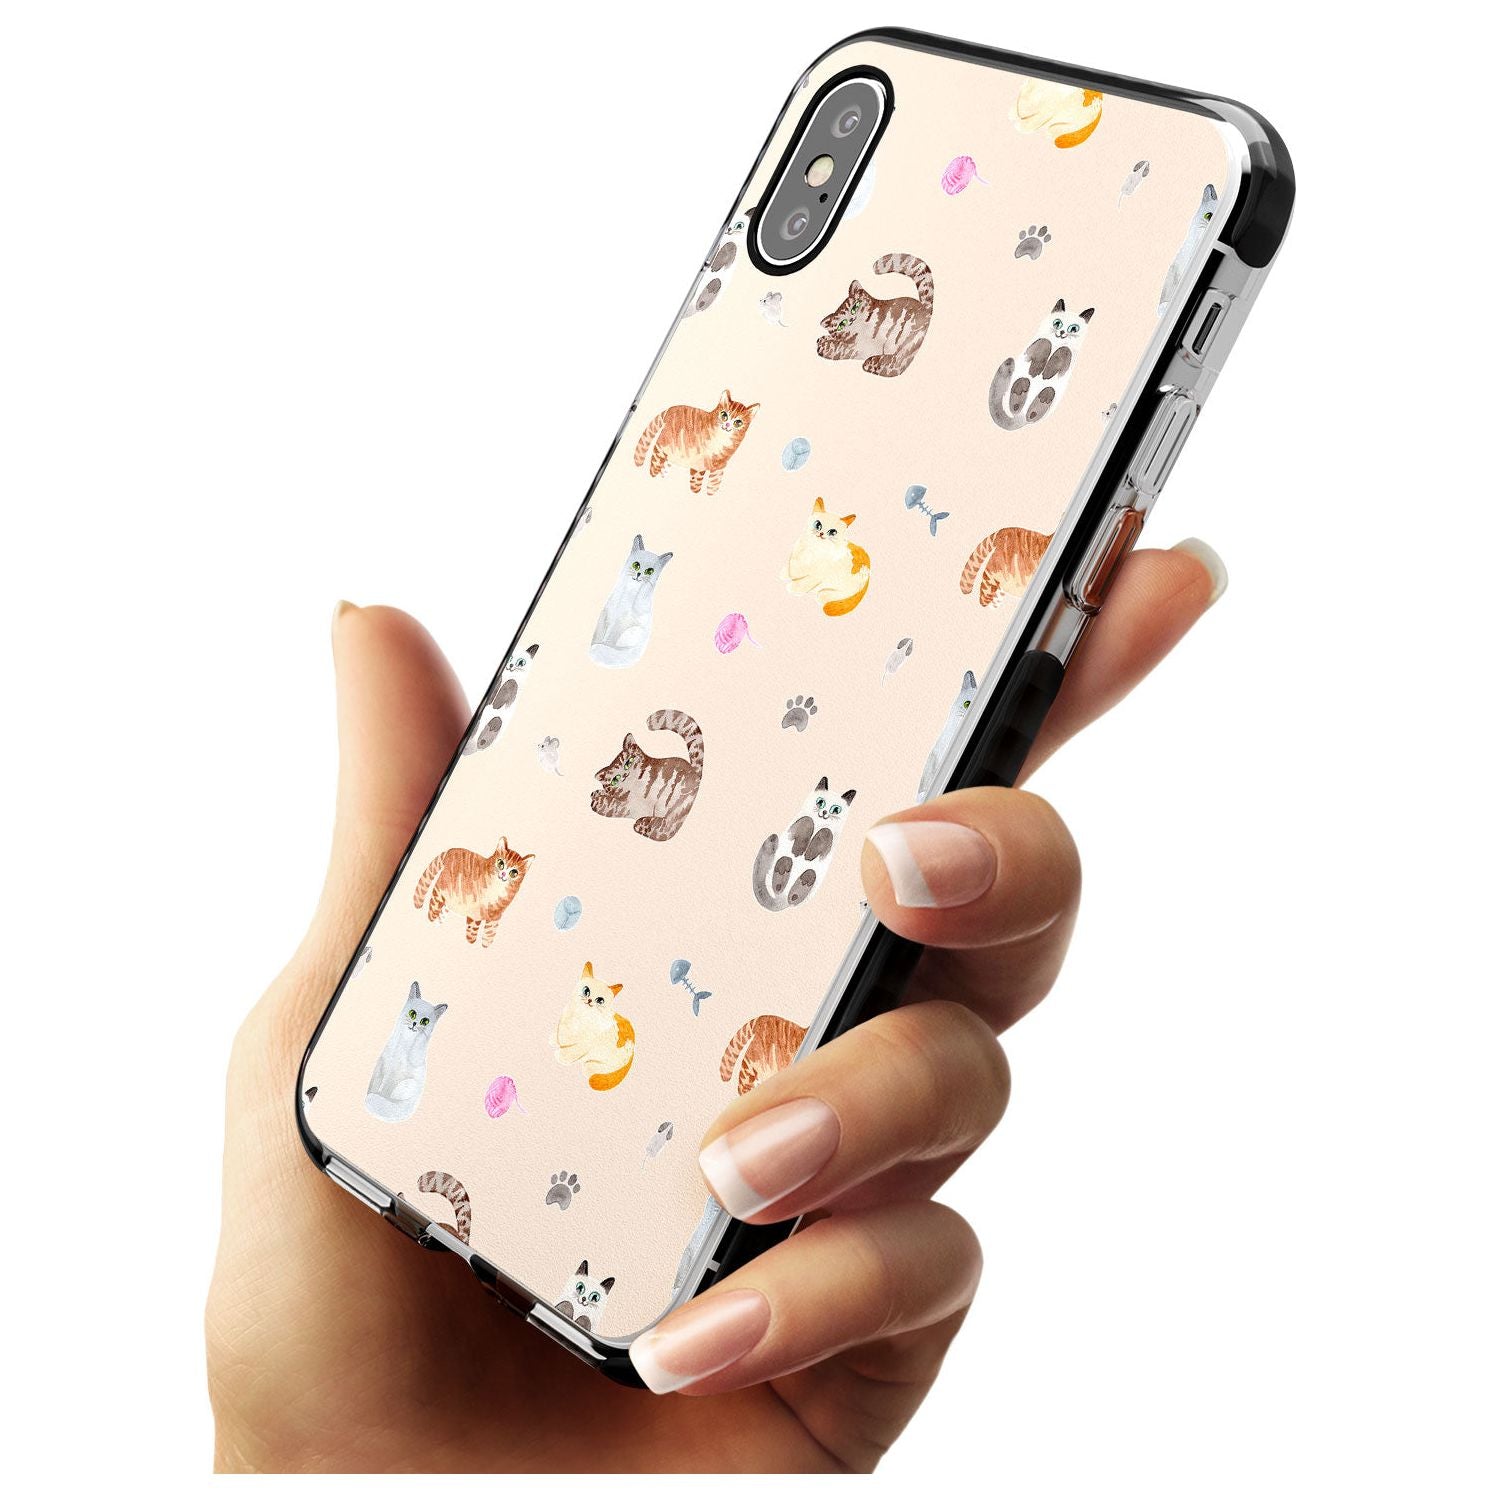 Cats with Toys Pink Fade Impact Phone Case for iPhone X XS Max XR